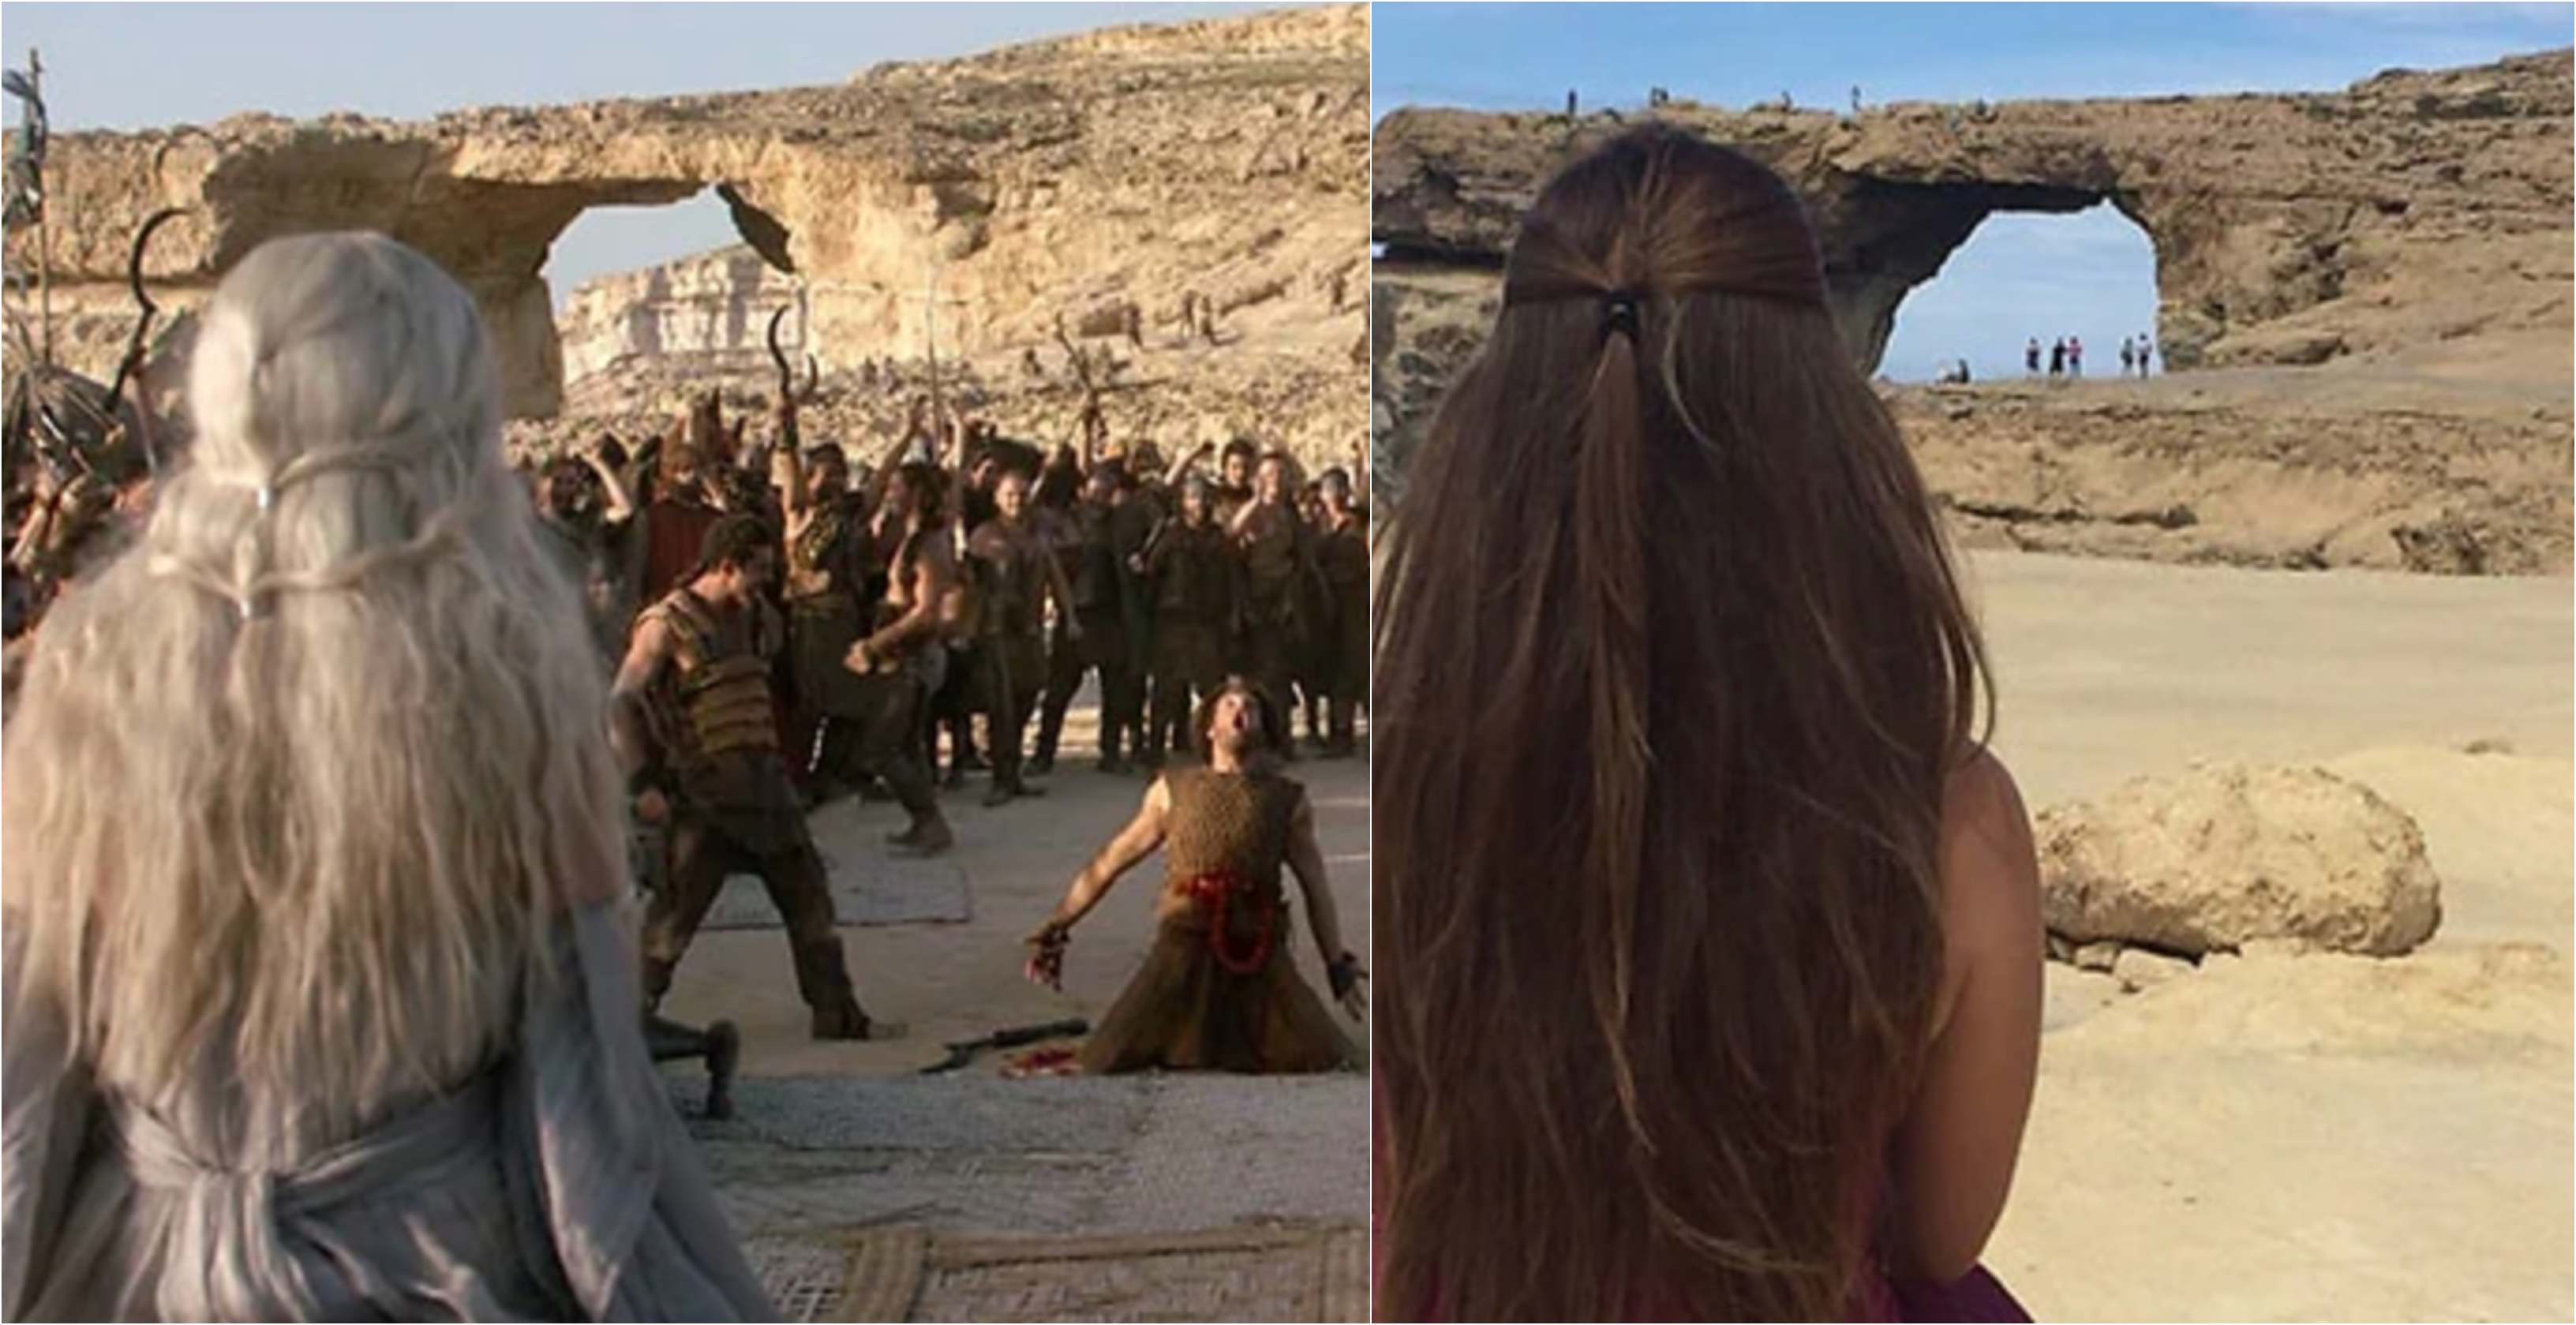 This is how a number of key places in Game of Thrones look in real life